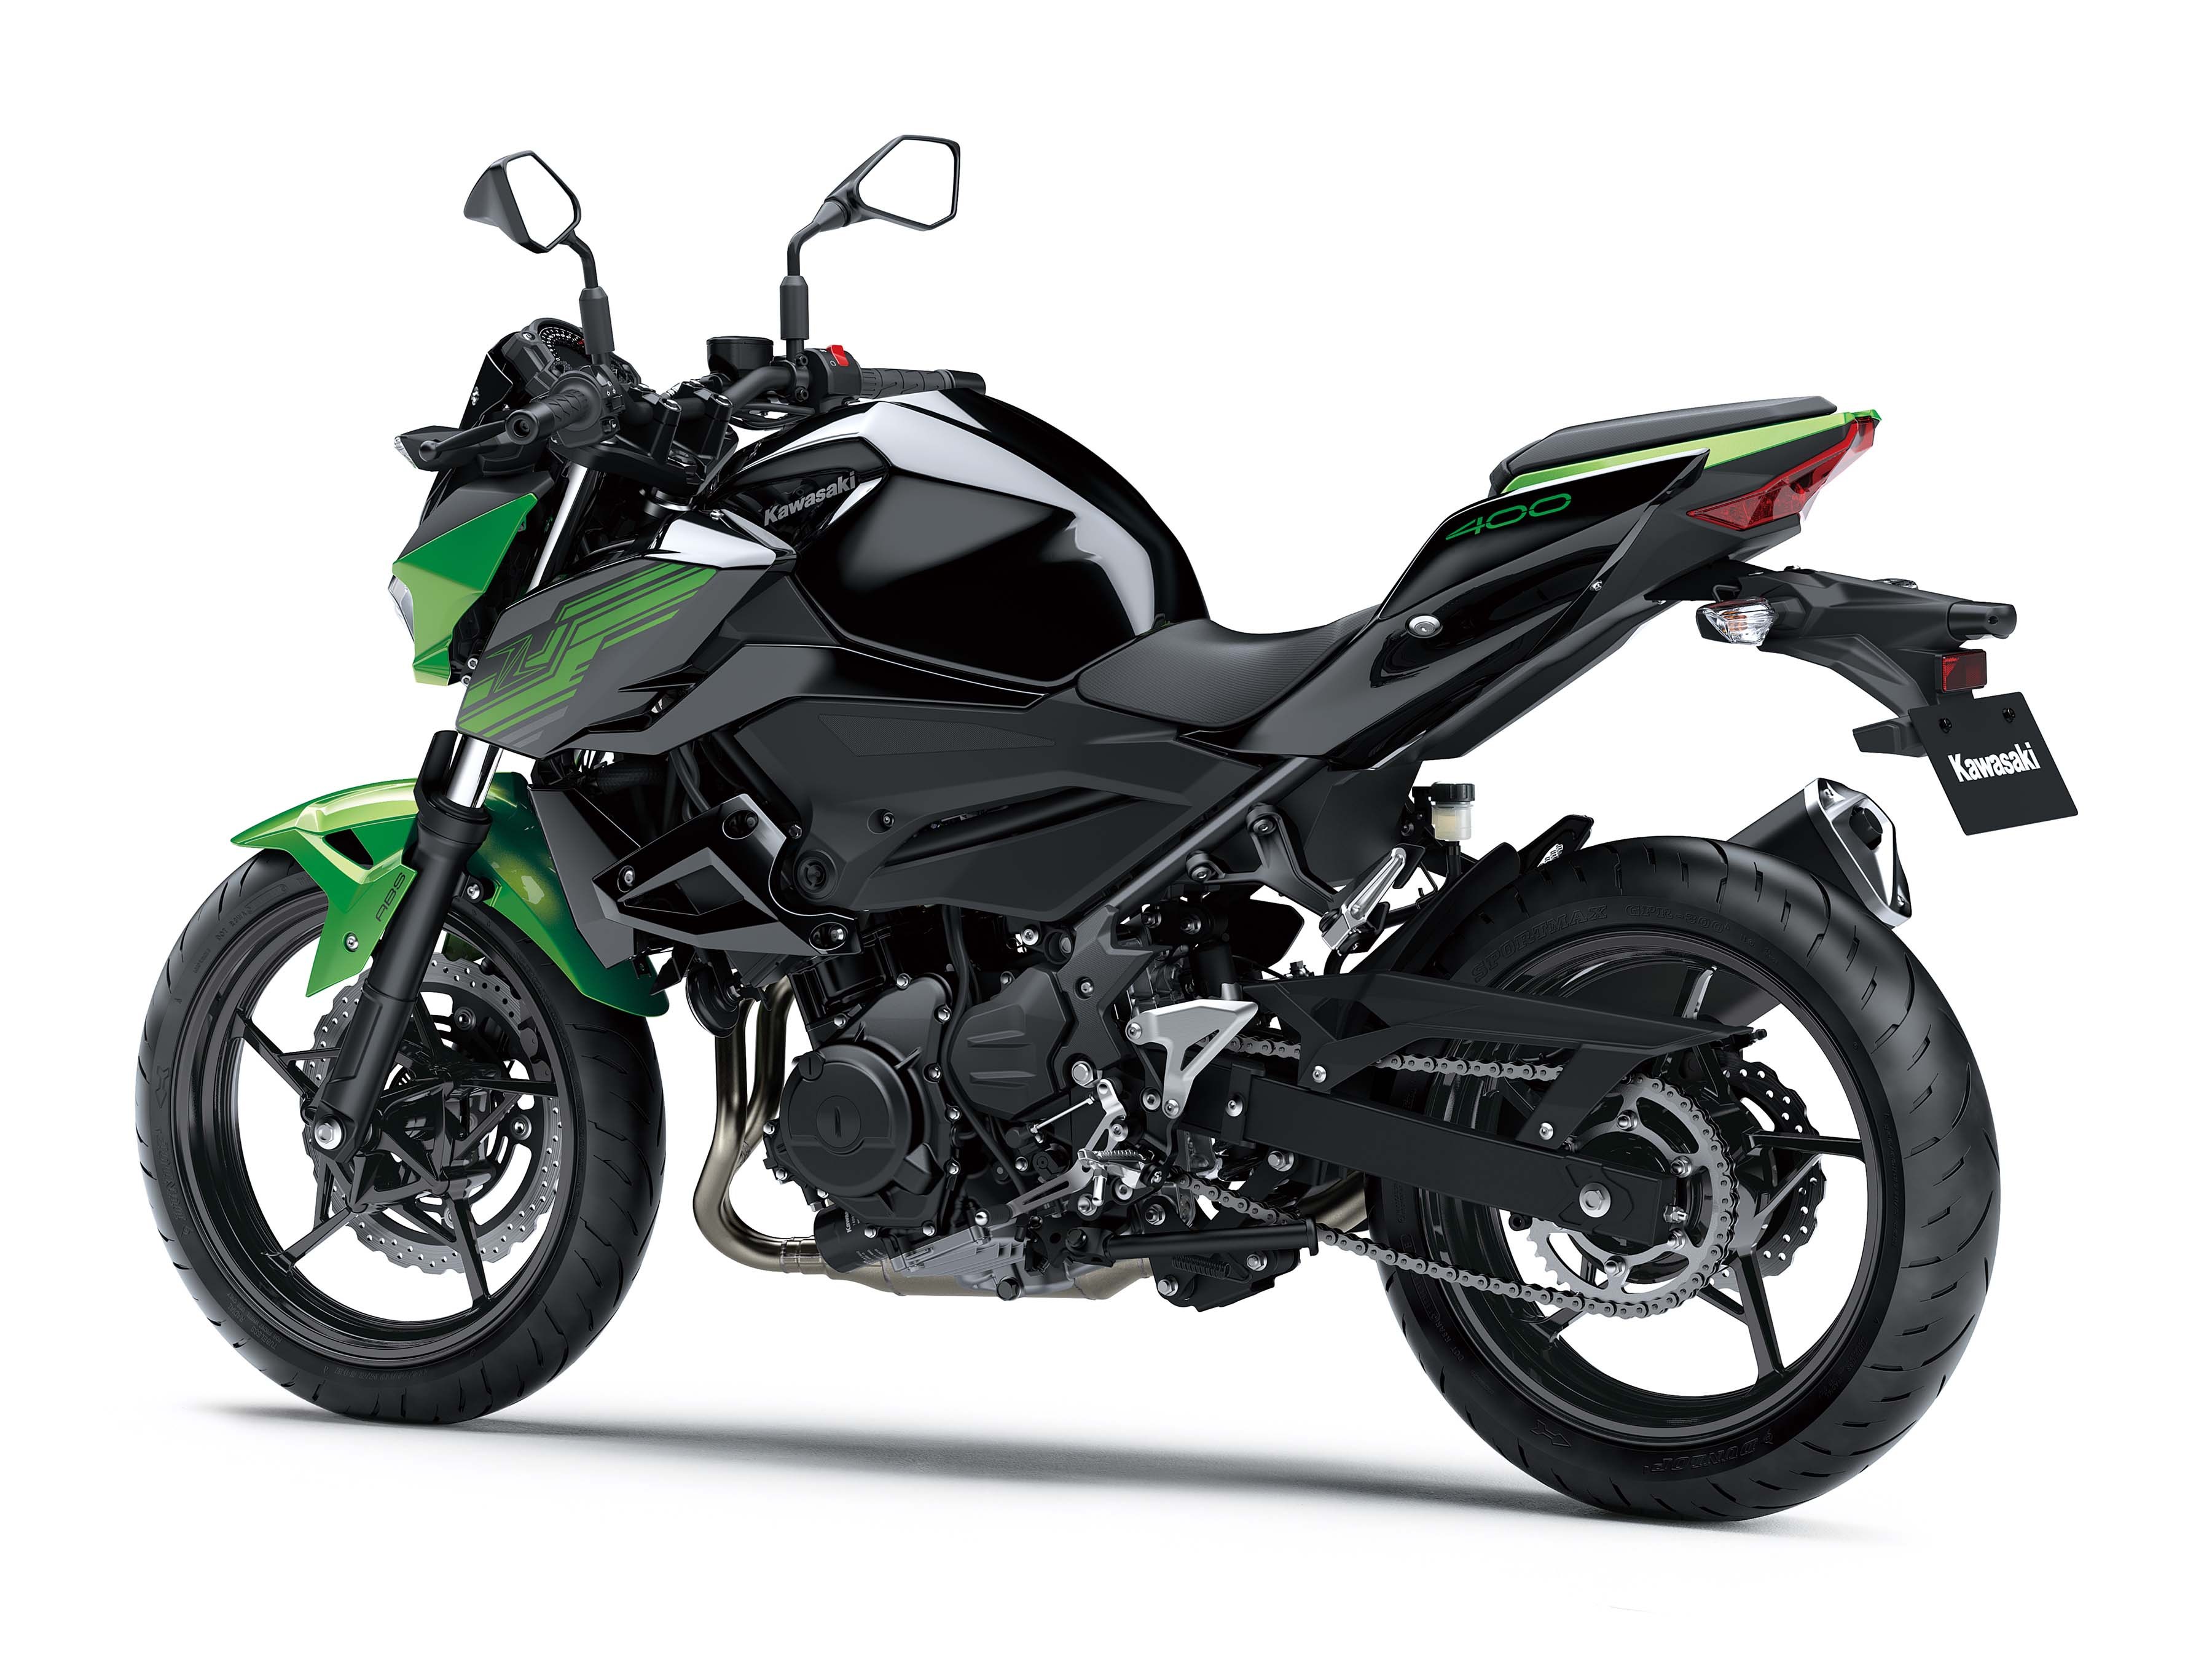 TopGear | 2019 Kawasaki ABS and Z400 SE ABS launched in Malaysia